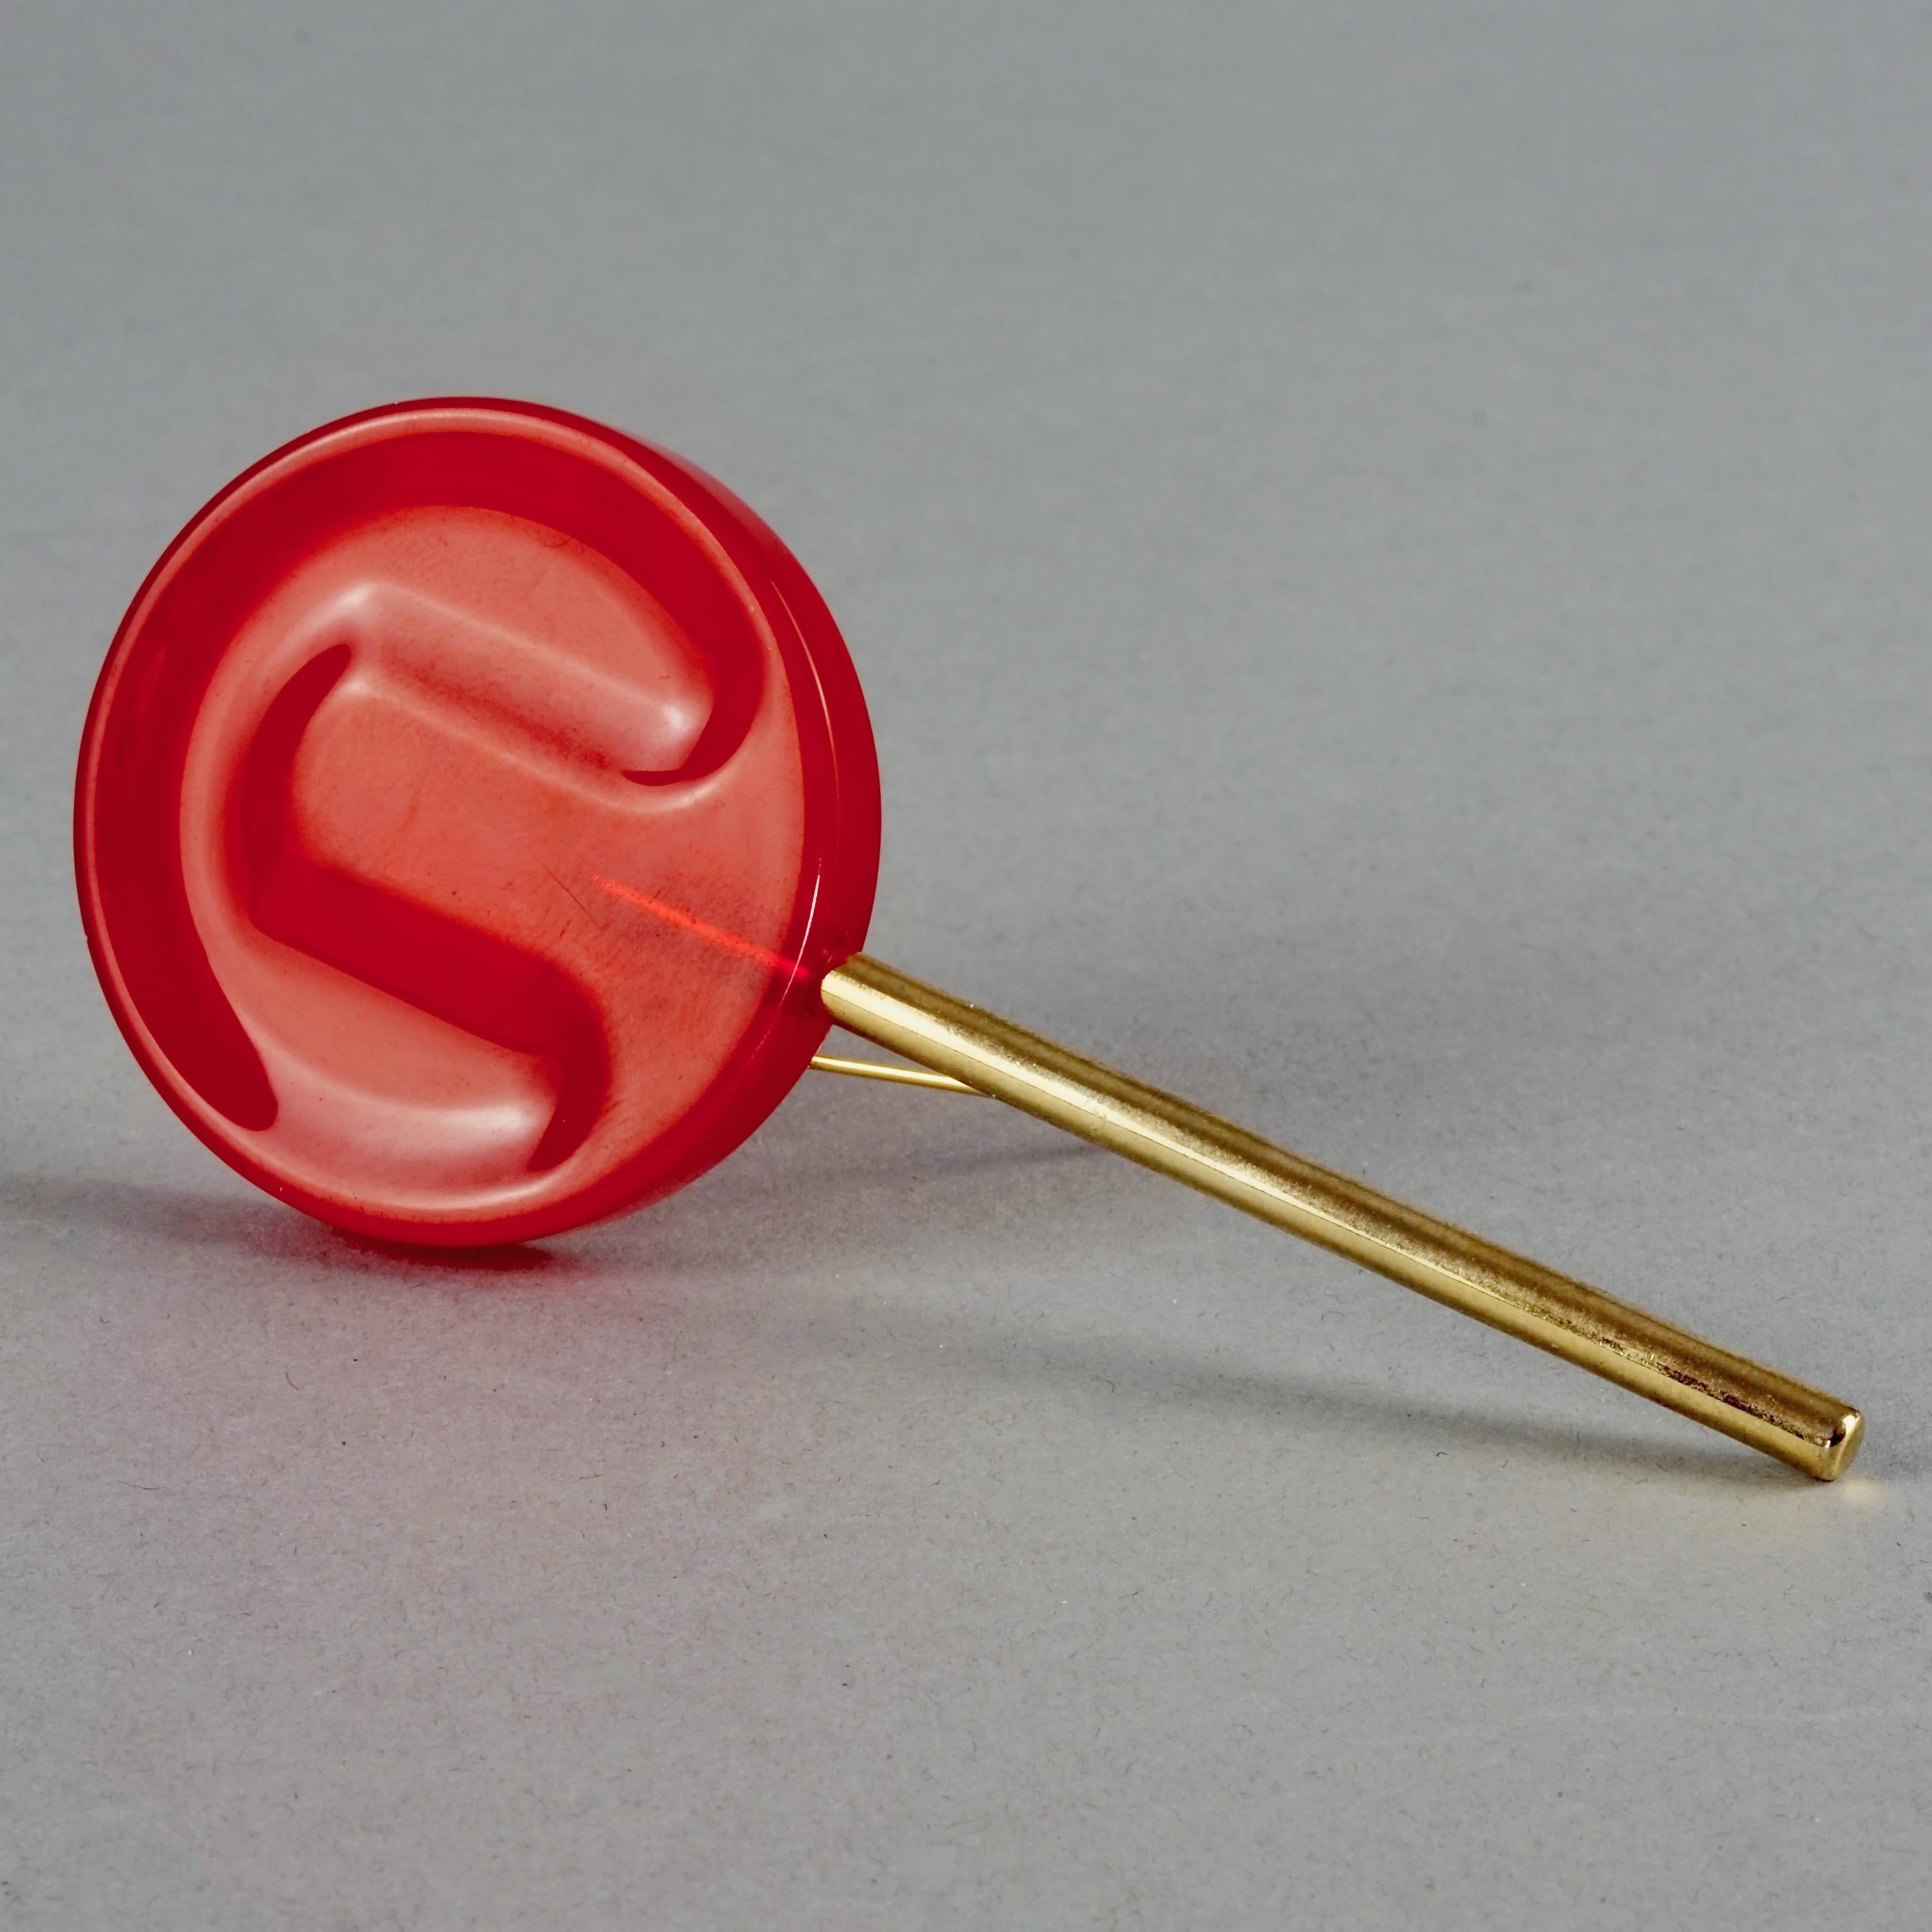 Women's or Men's Vintage MOSCHINO Red Cherry Lollipop Candy Novelty Brooch For Sale